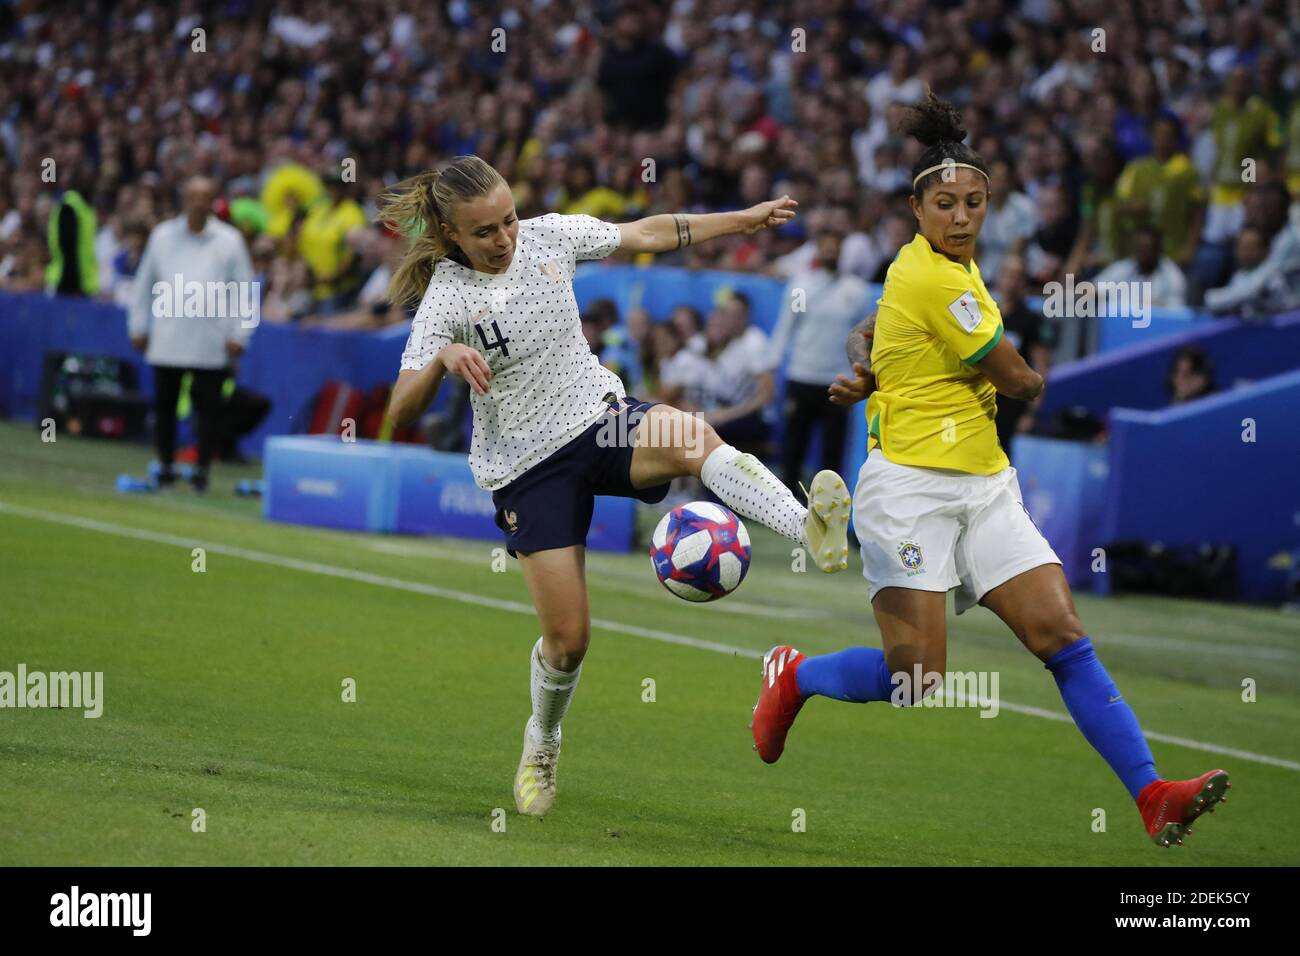 France's Manon Torrent battling Brazil's Cristiane during FIFA Women's World Cup France group A match France v Brazil on June 23, 2019 in Le Havre, France. France won 2-1 after extra time reaching quarter-finals. Photo by Henri Szwarc/ABACAPRESS.COM Stock Photo